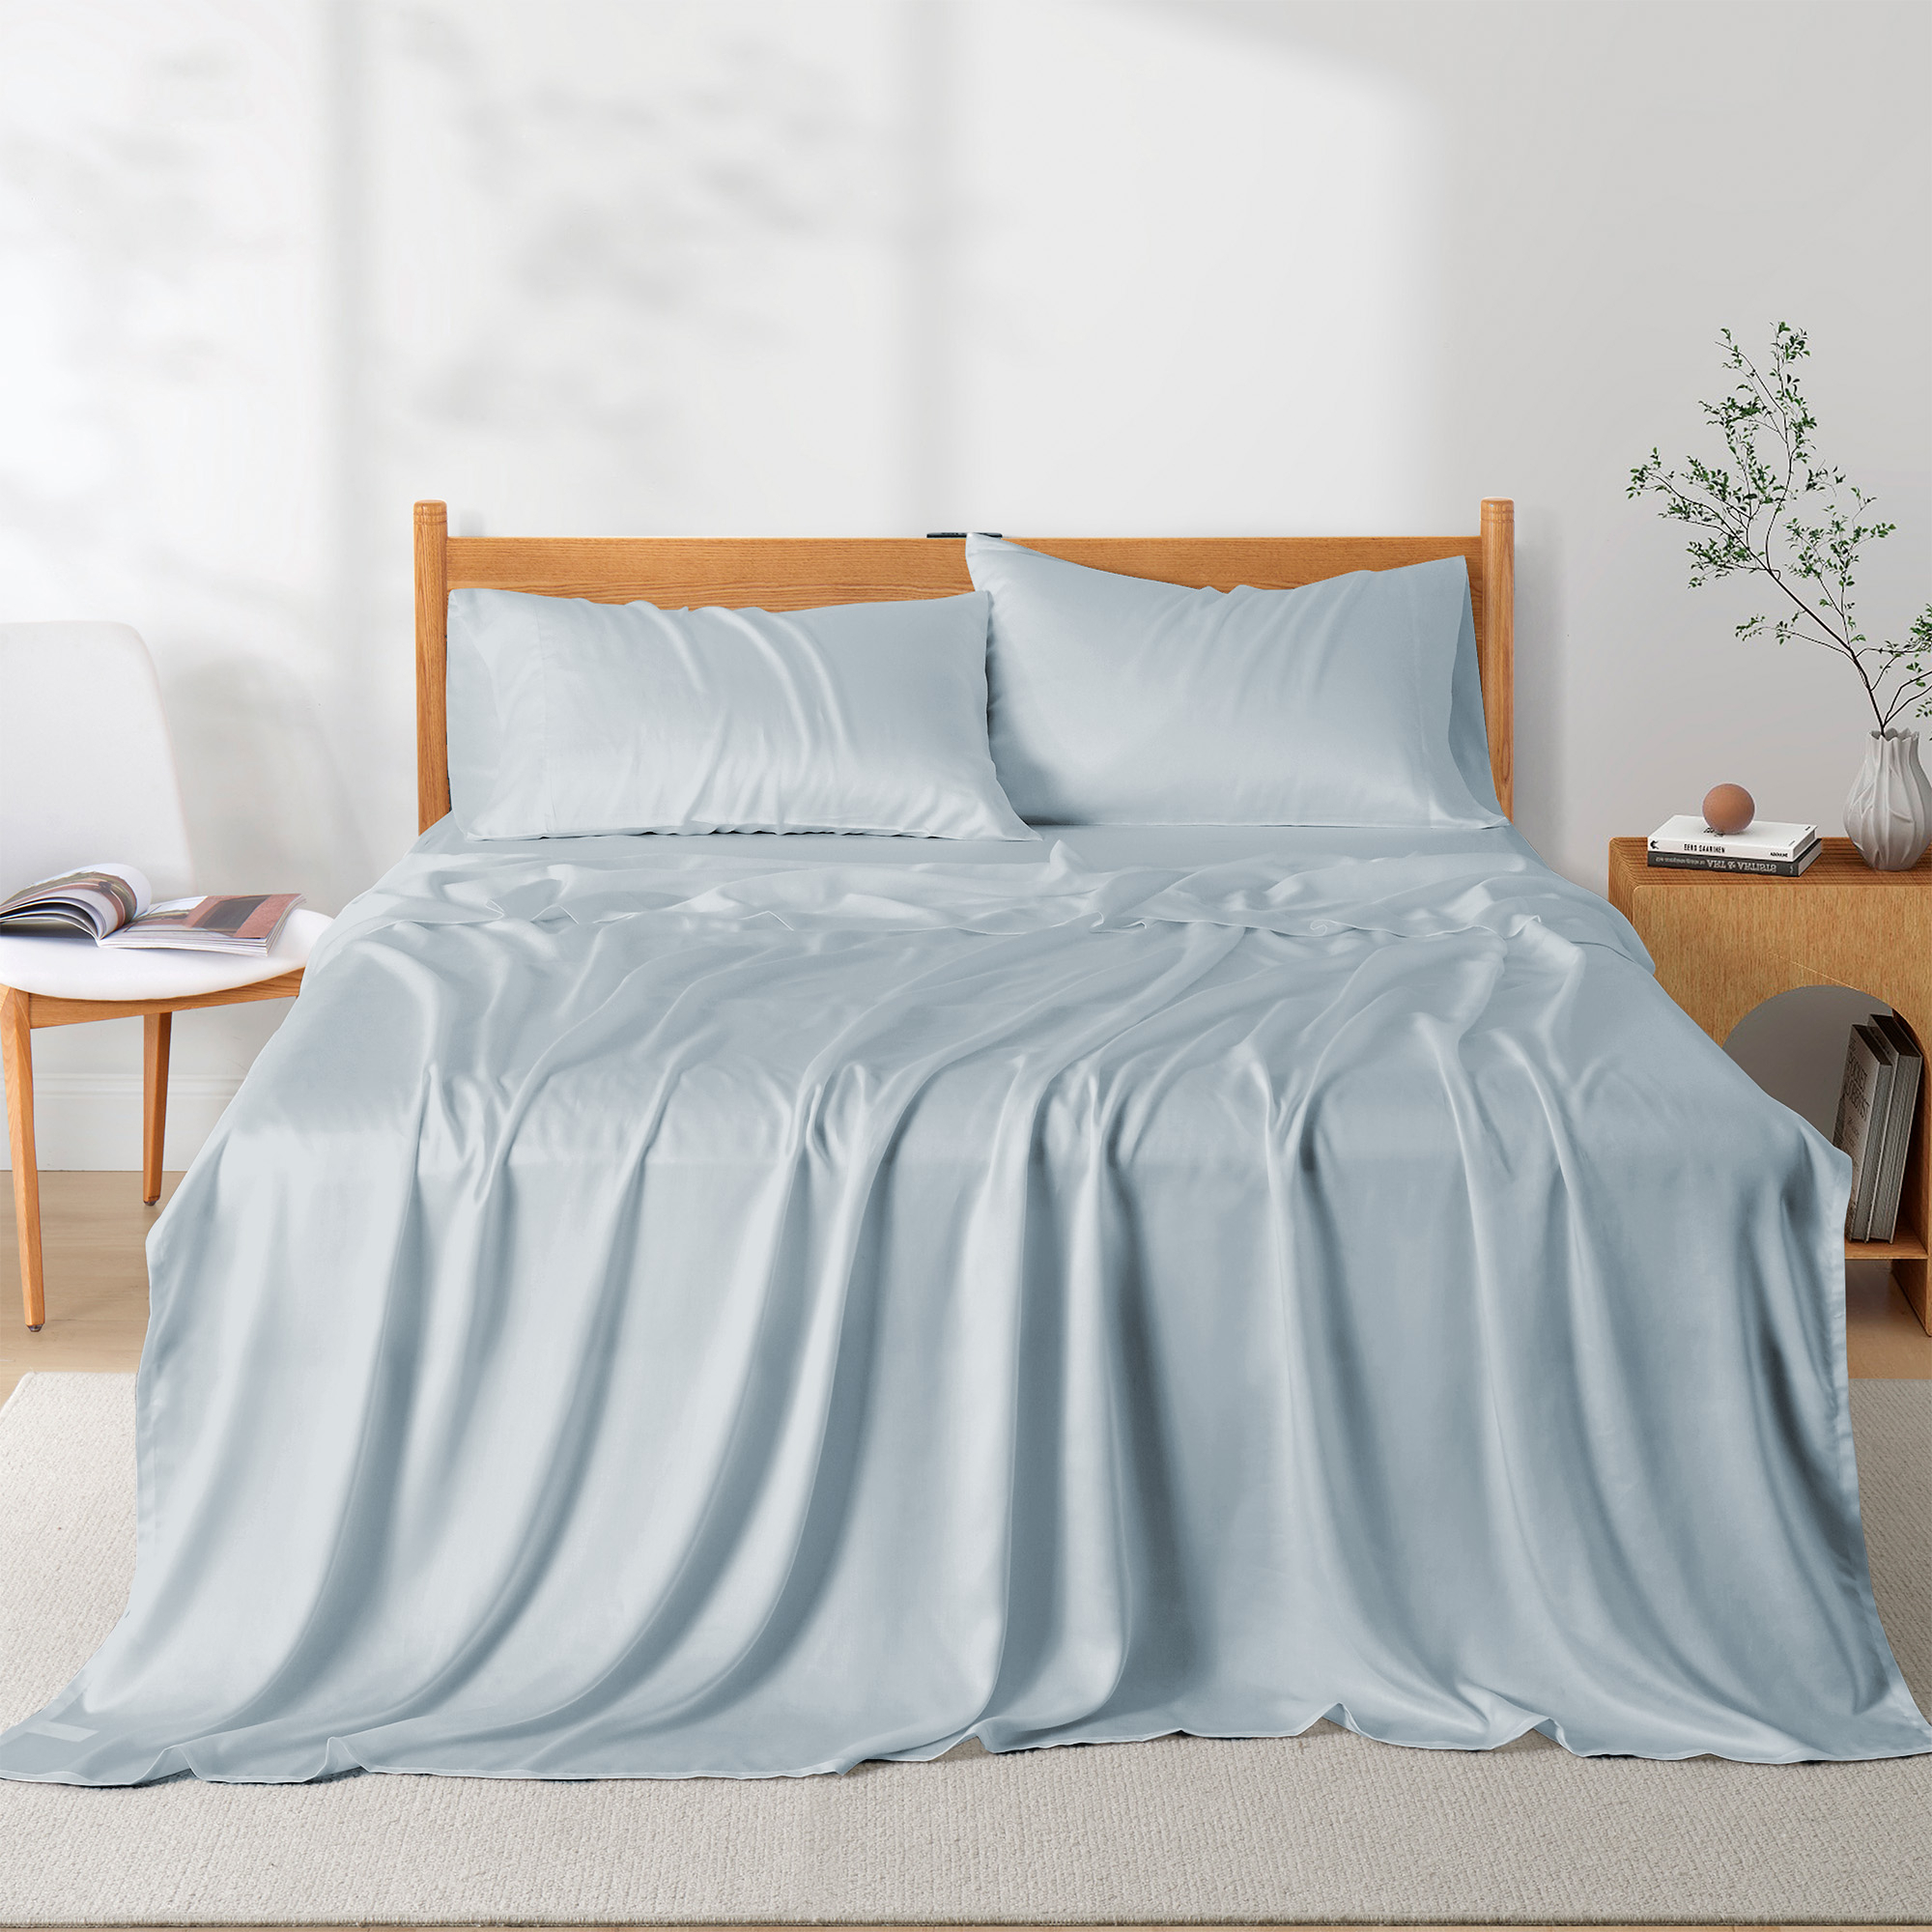 Cooling Sheets For Hot Sleepers, TENCELâ¢ Lyocell Sheets, Deep Pocket, Hotel Sheets - King Size